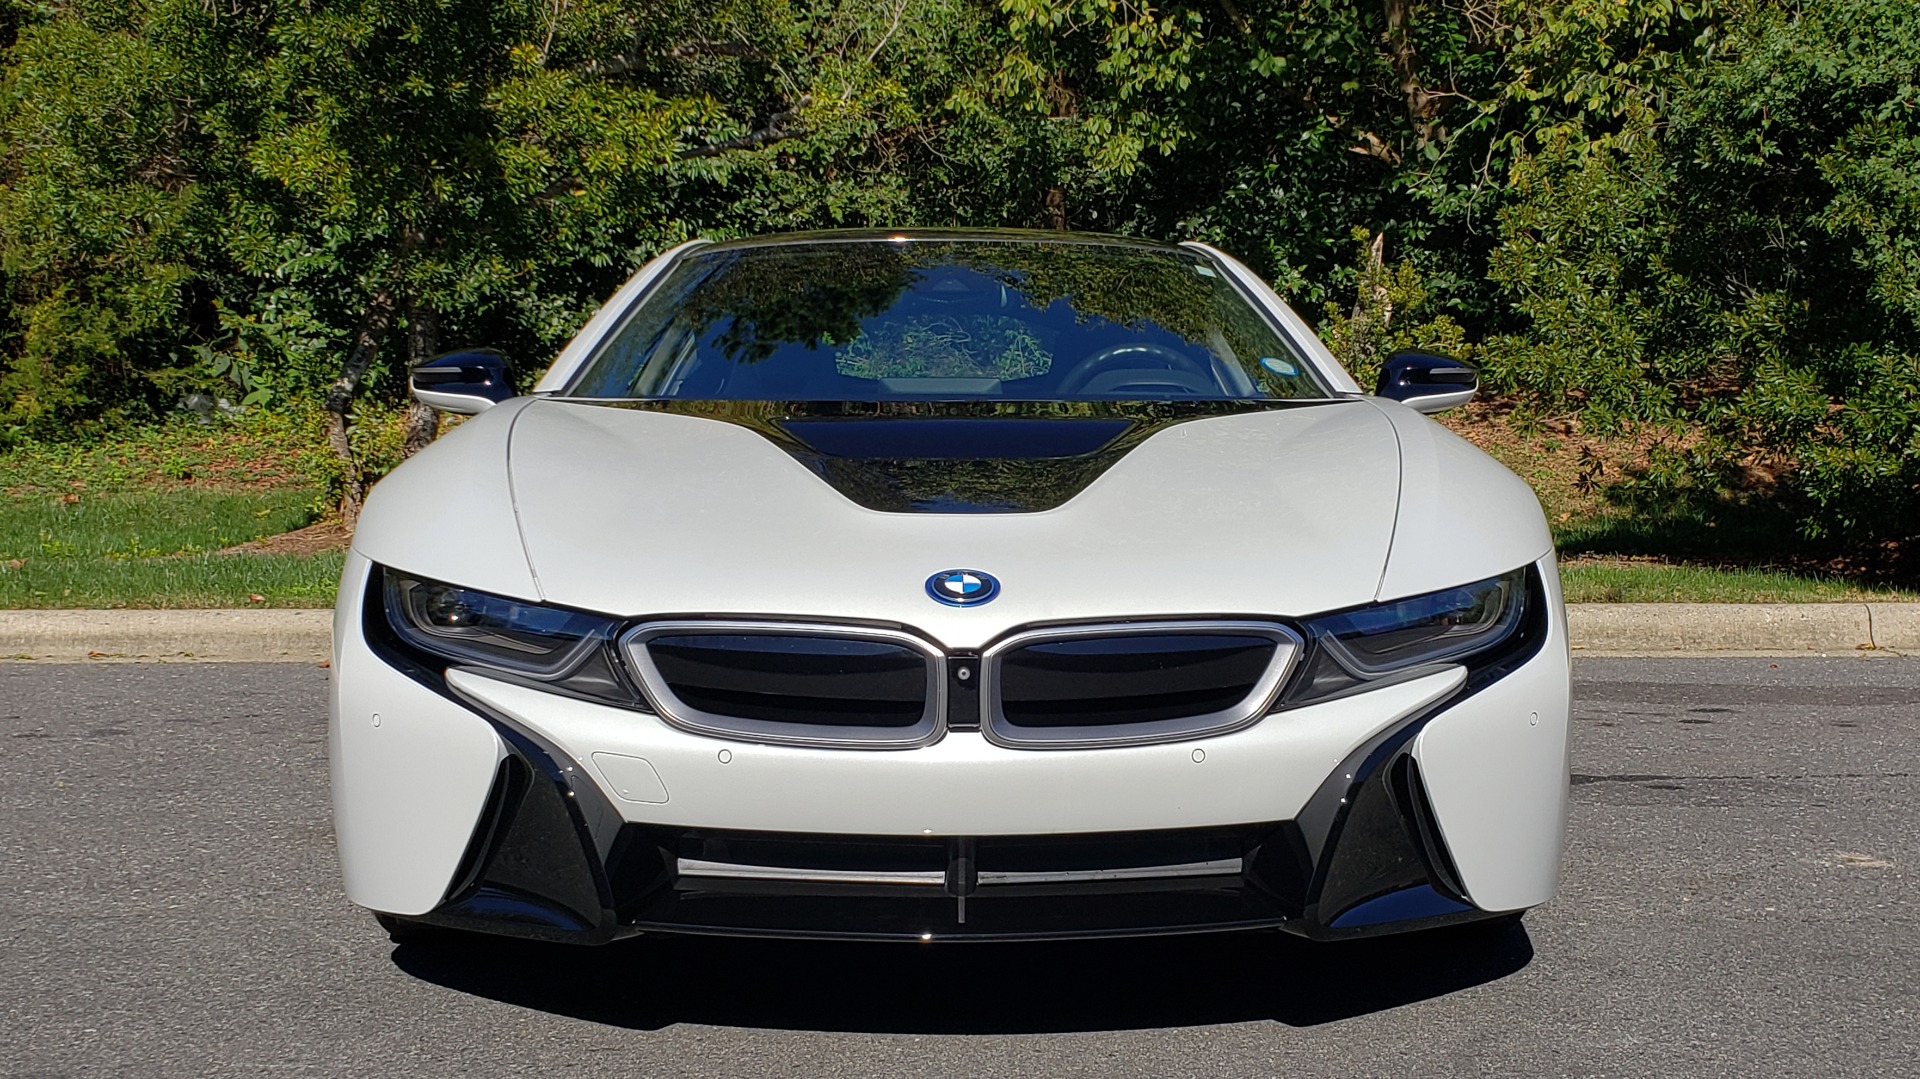 Used 2014 BMW i8 COUPE / TERA WORLD / NAV / CARBON FIBER ROOF / REARVIEW for sale Sold at Formula Imports in Charlotte NC 28227 12